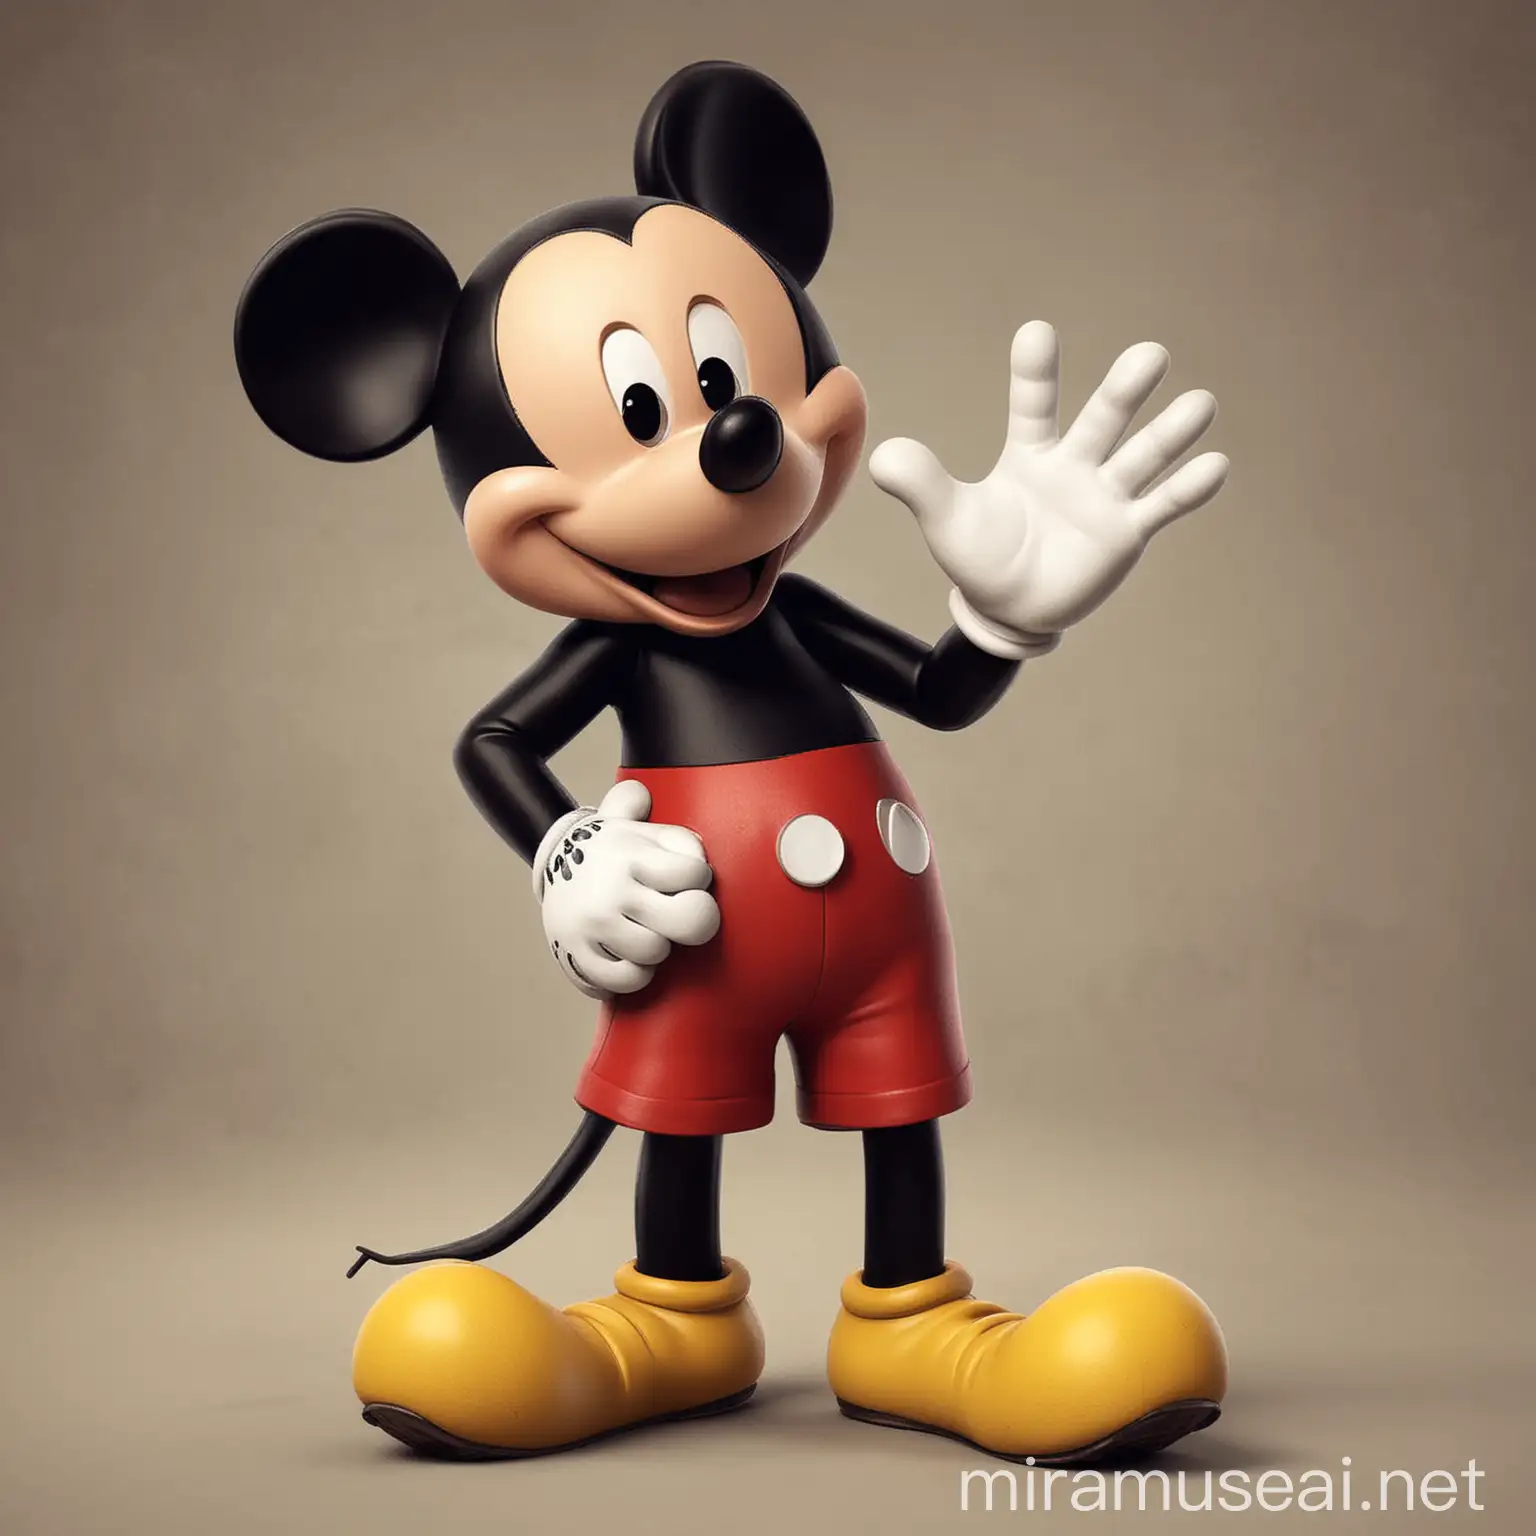 Mickey mouse saying:Hi Jorge Andres!!  i just wanted to tell you that i am very proud of you! You have done all of your assignments and for Tuesday  you just have to do one model!! plus you just got your licence! it is a great day to smile and be happy!
